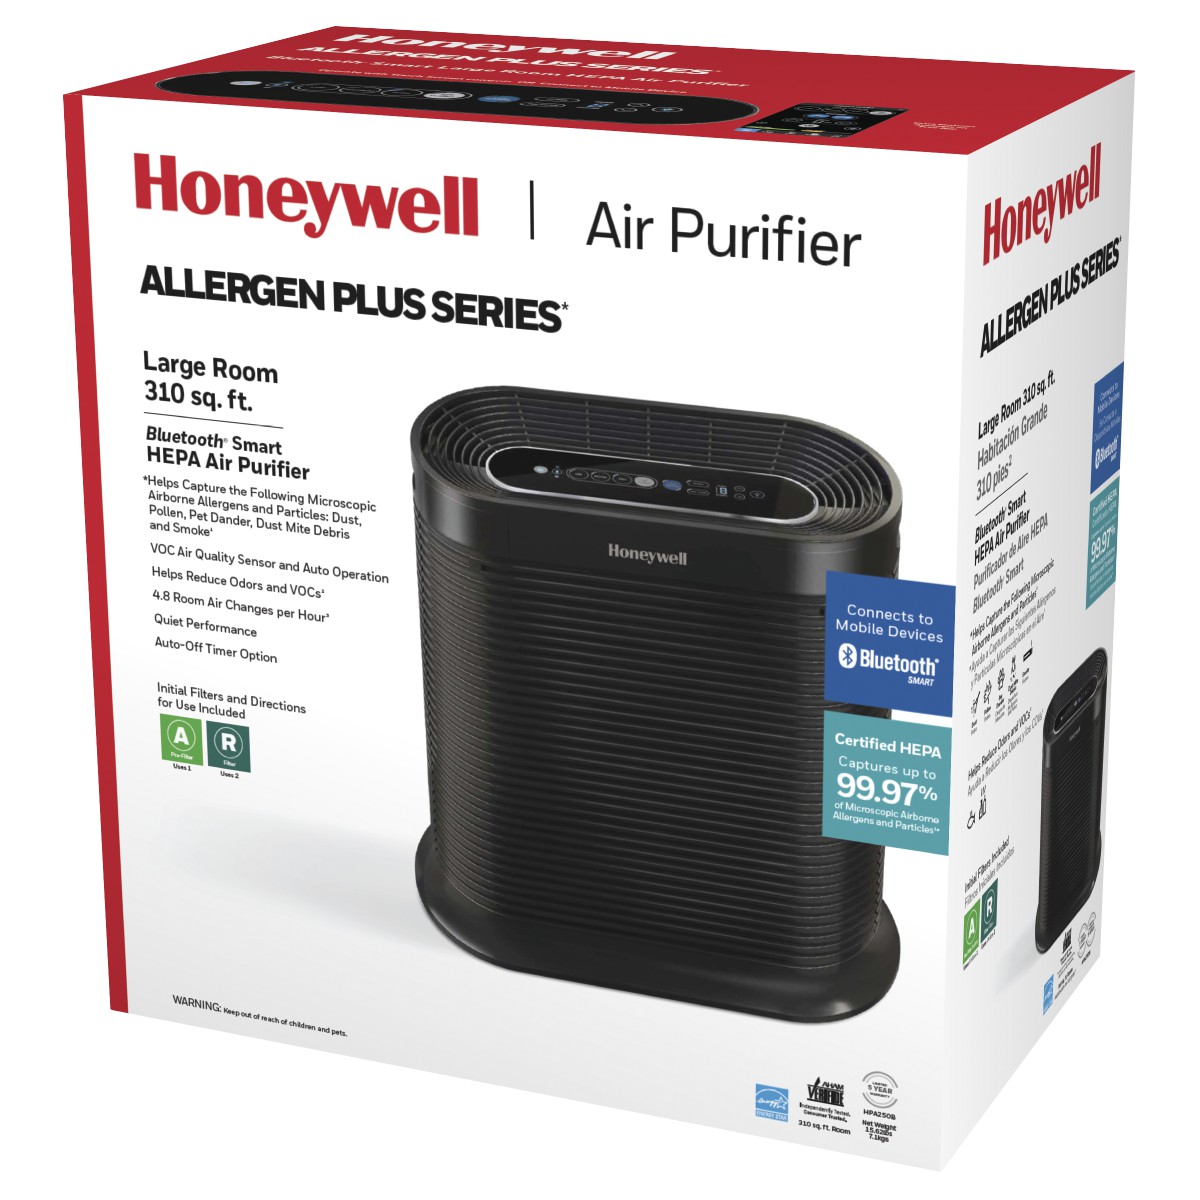 Honeywell Bluetooth HEPA Air Purifier for Large Rooms (310 sq ft), Black, HPA250B - image 3 of 6